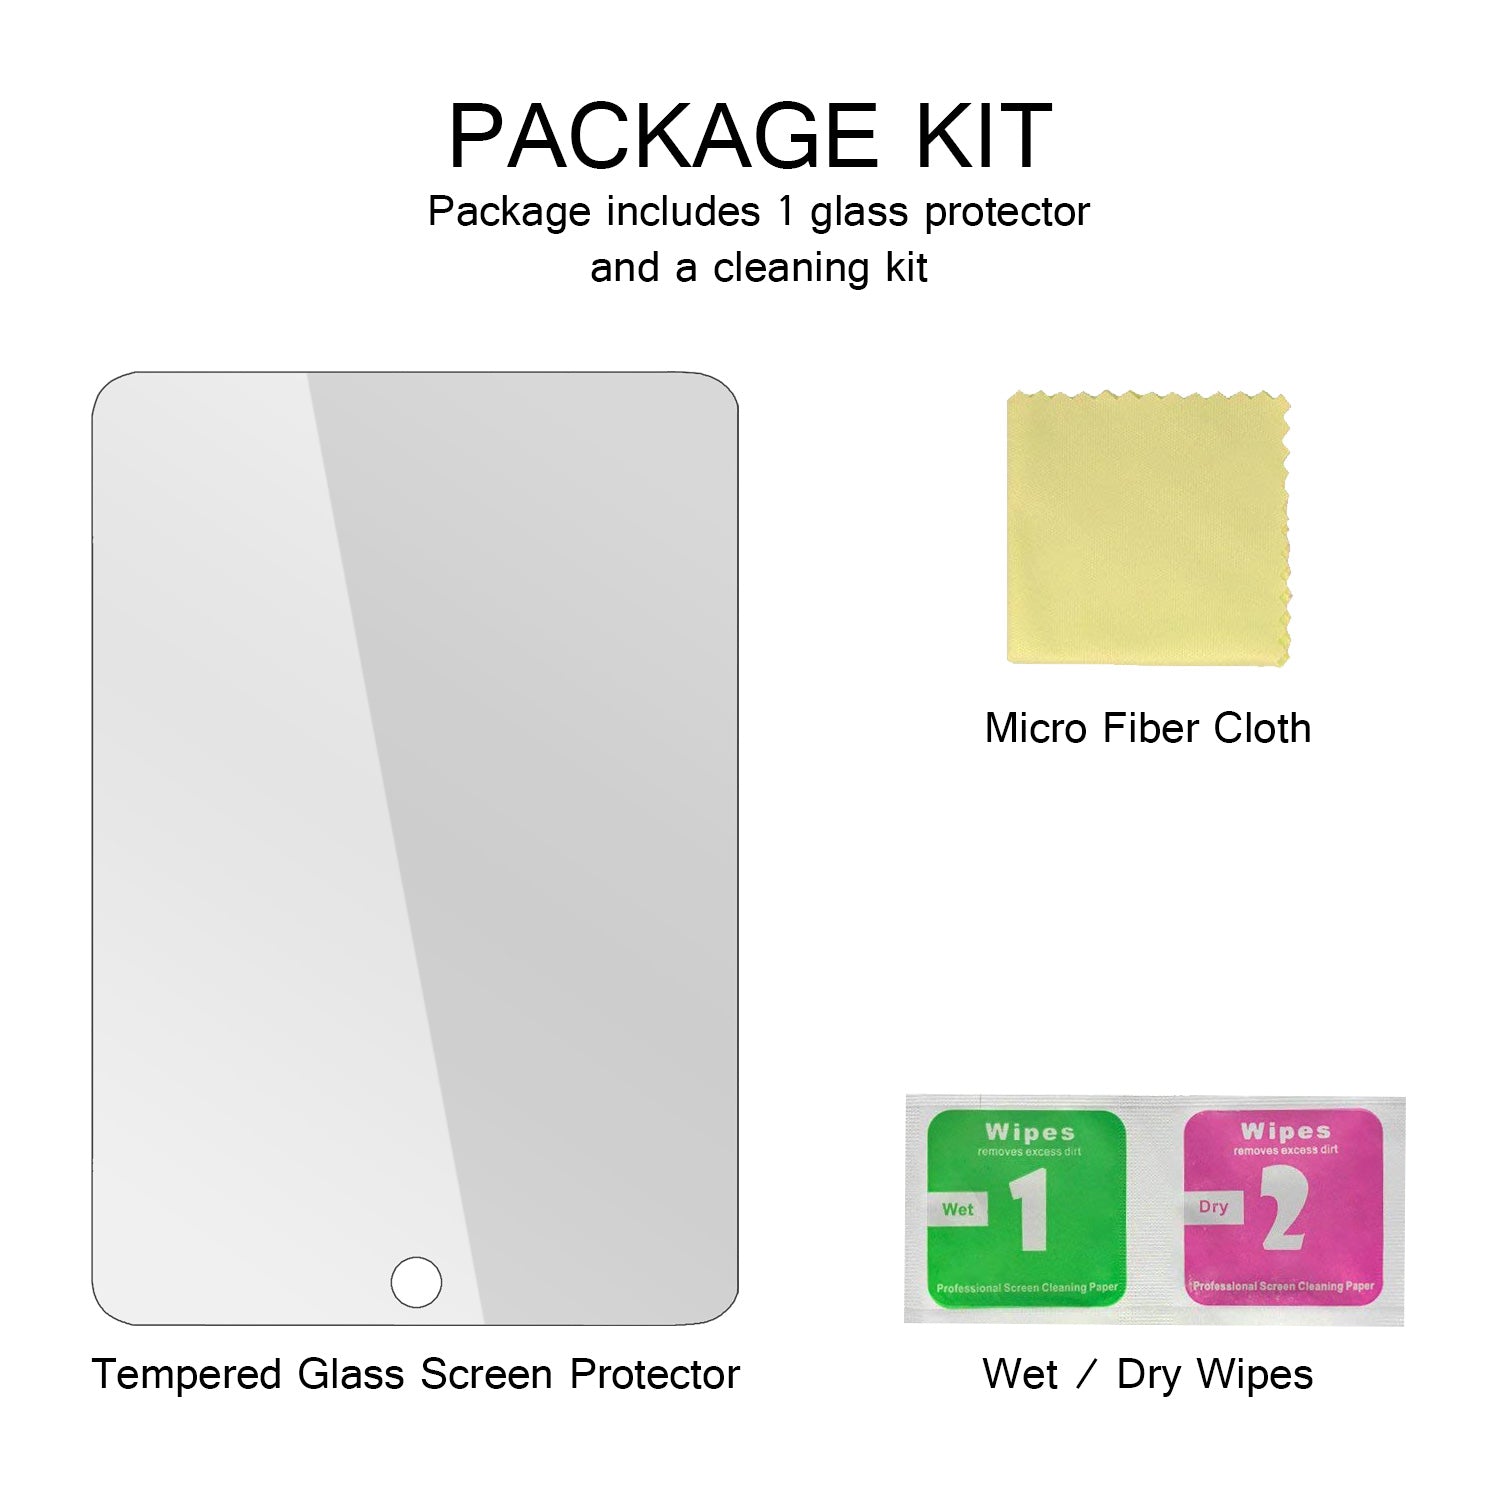 2X Tempered Glass Screen Protector for Apple iPad Air 1 / Air 2 / Air Pro 9.7.